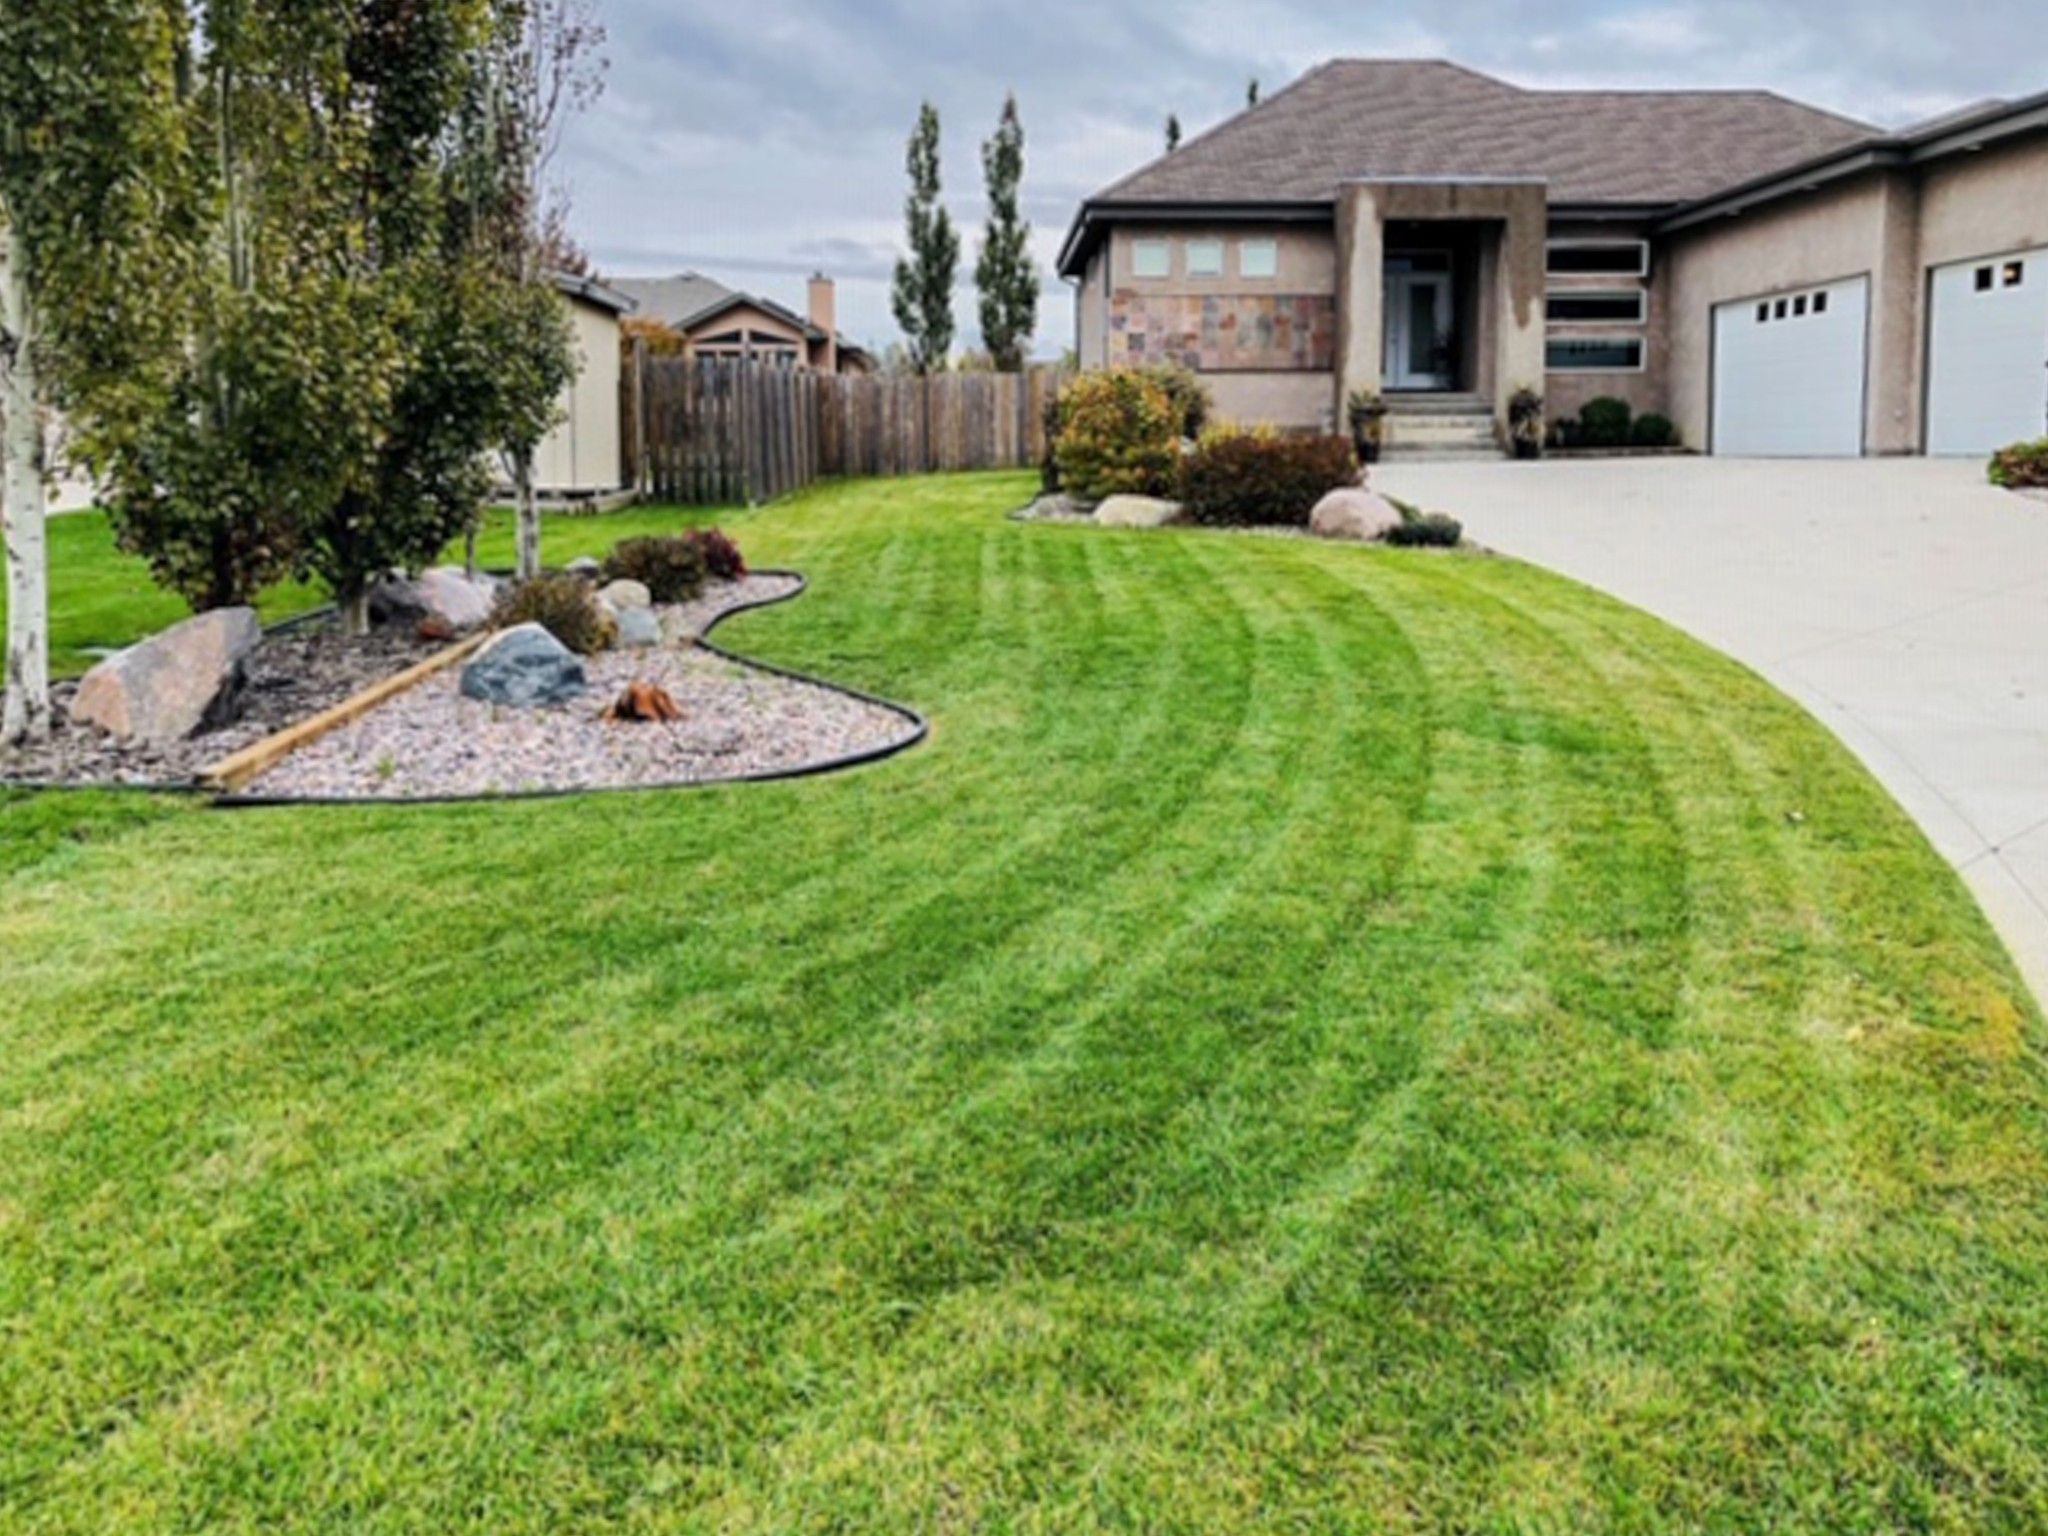 Immaculate custom built 3+ bedroom Bungalow, fully finished basement w/ two additional bedrooms, 34x20 AT3 on fenced and beautifully landscaped 85 x 140 lot in the Town of Oakbank